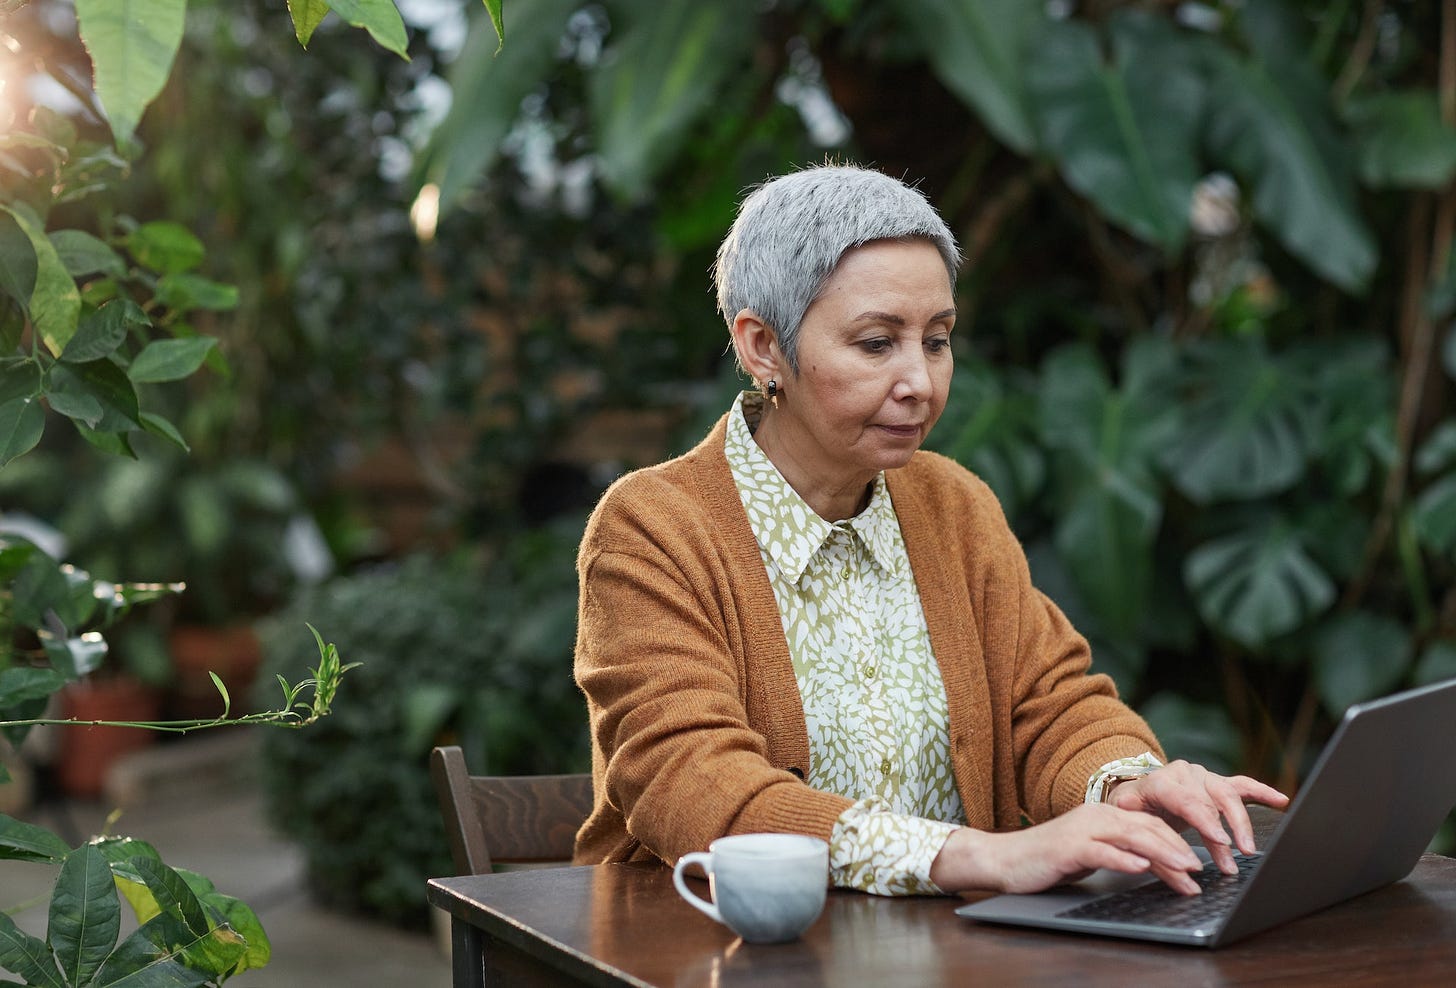 Elderly woman with short grey hair using an Apple Macbook outside with a white mug next to her. The elderly woman is wearing a floral top and a brown jacket and is sat in a leafy scene outside her home.